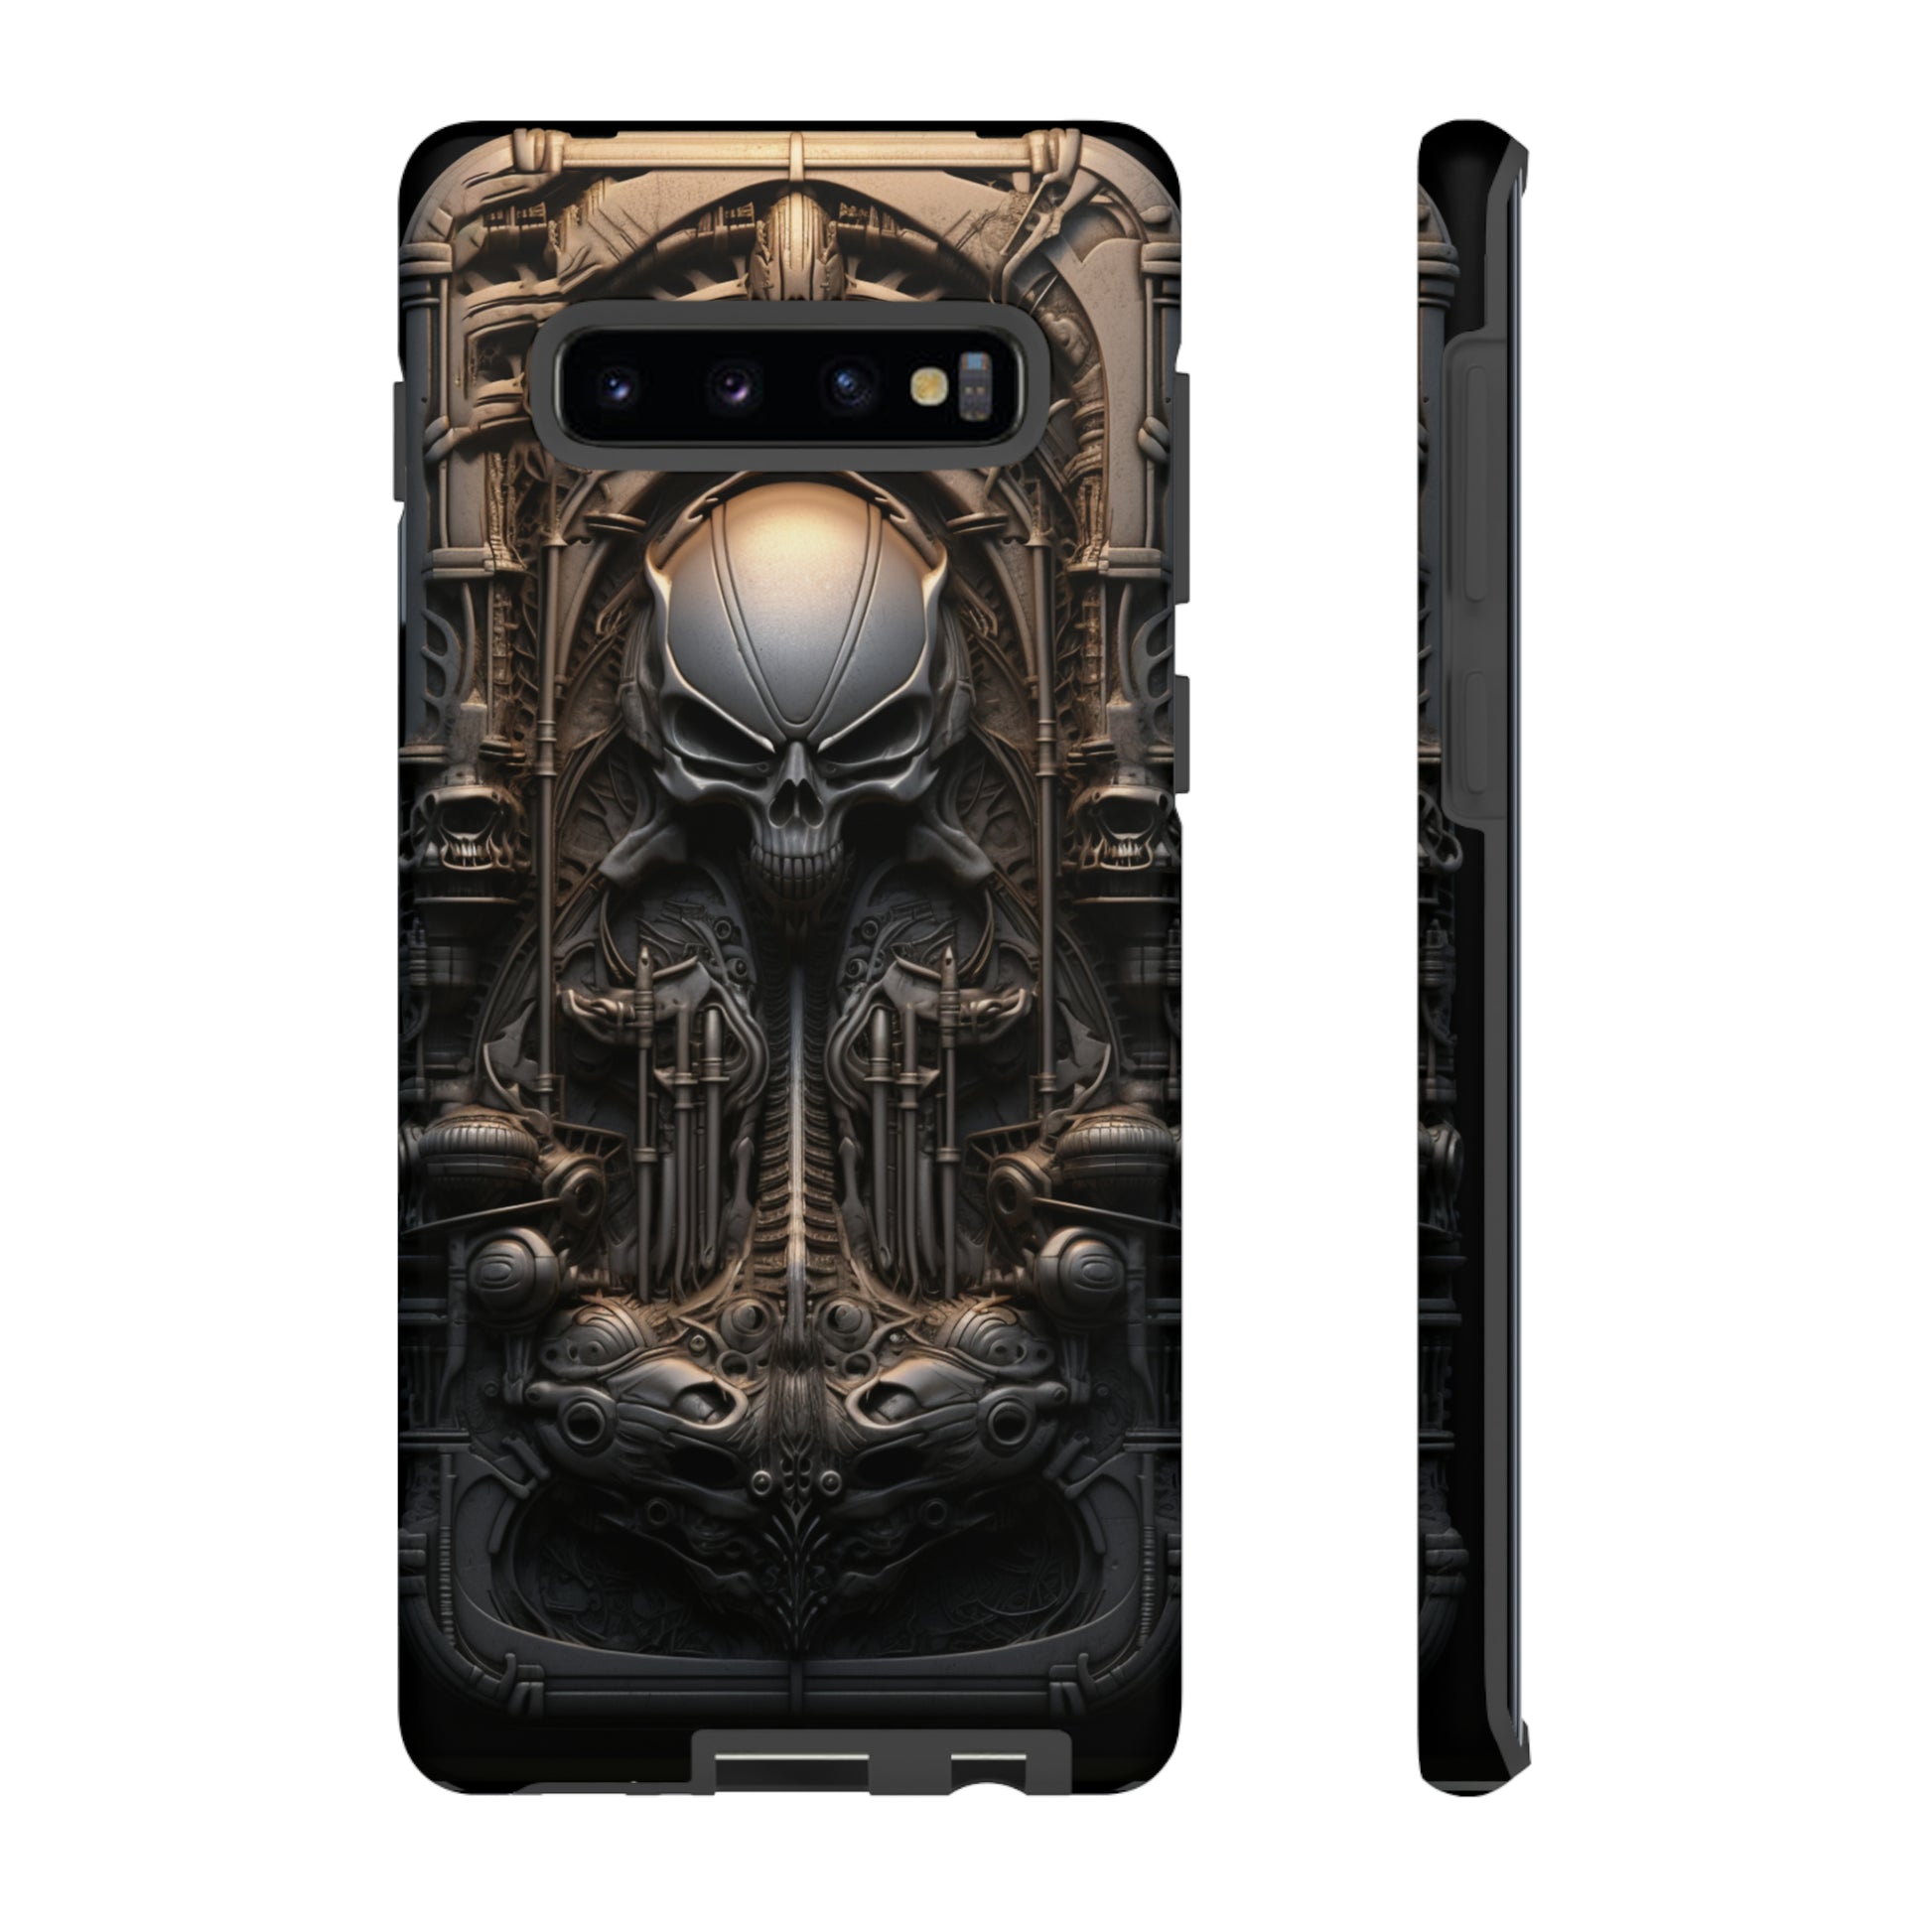 alien aesthetic phone case for iPhone 12